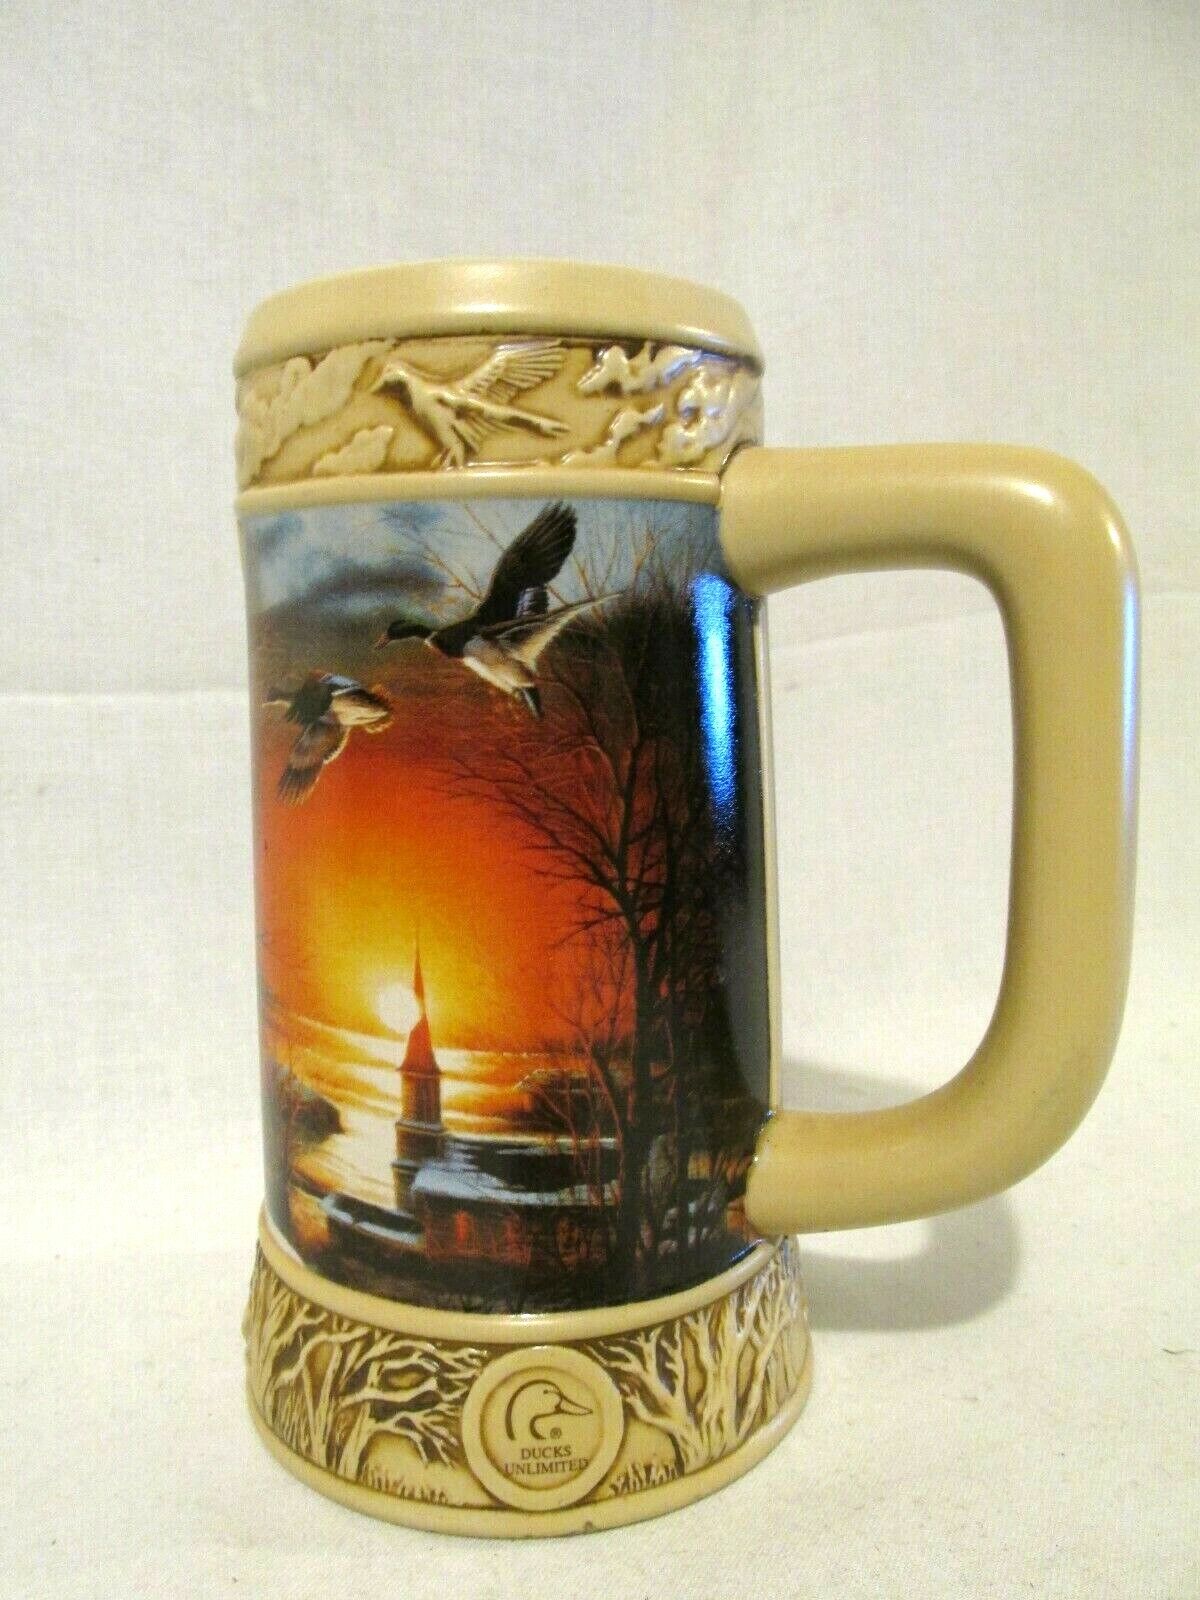 DUCKS UNLIMITED MILLER BEER STEIN THE SHARING SEASON TERRY REDLIN COLLECTION